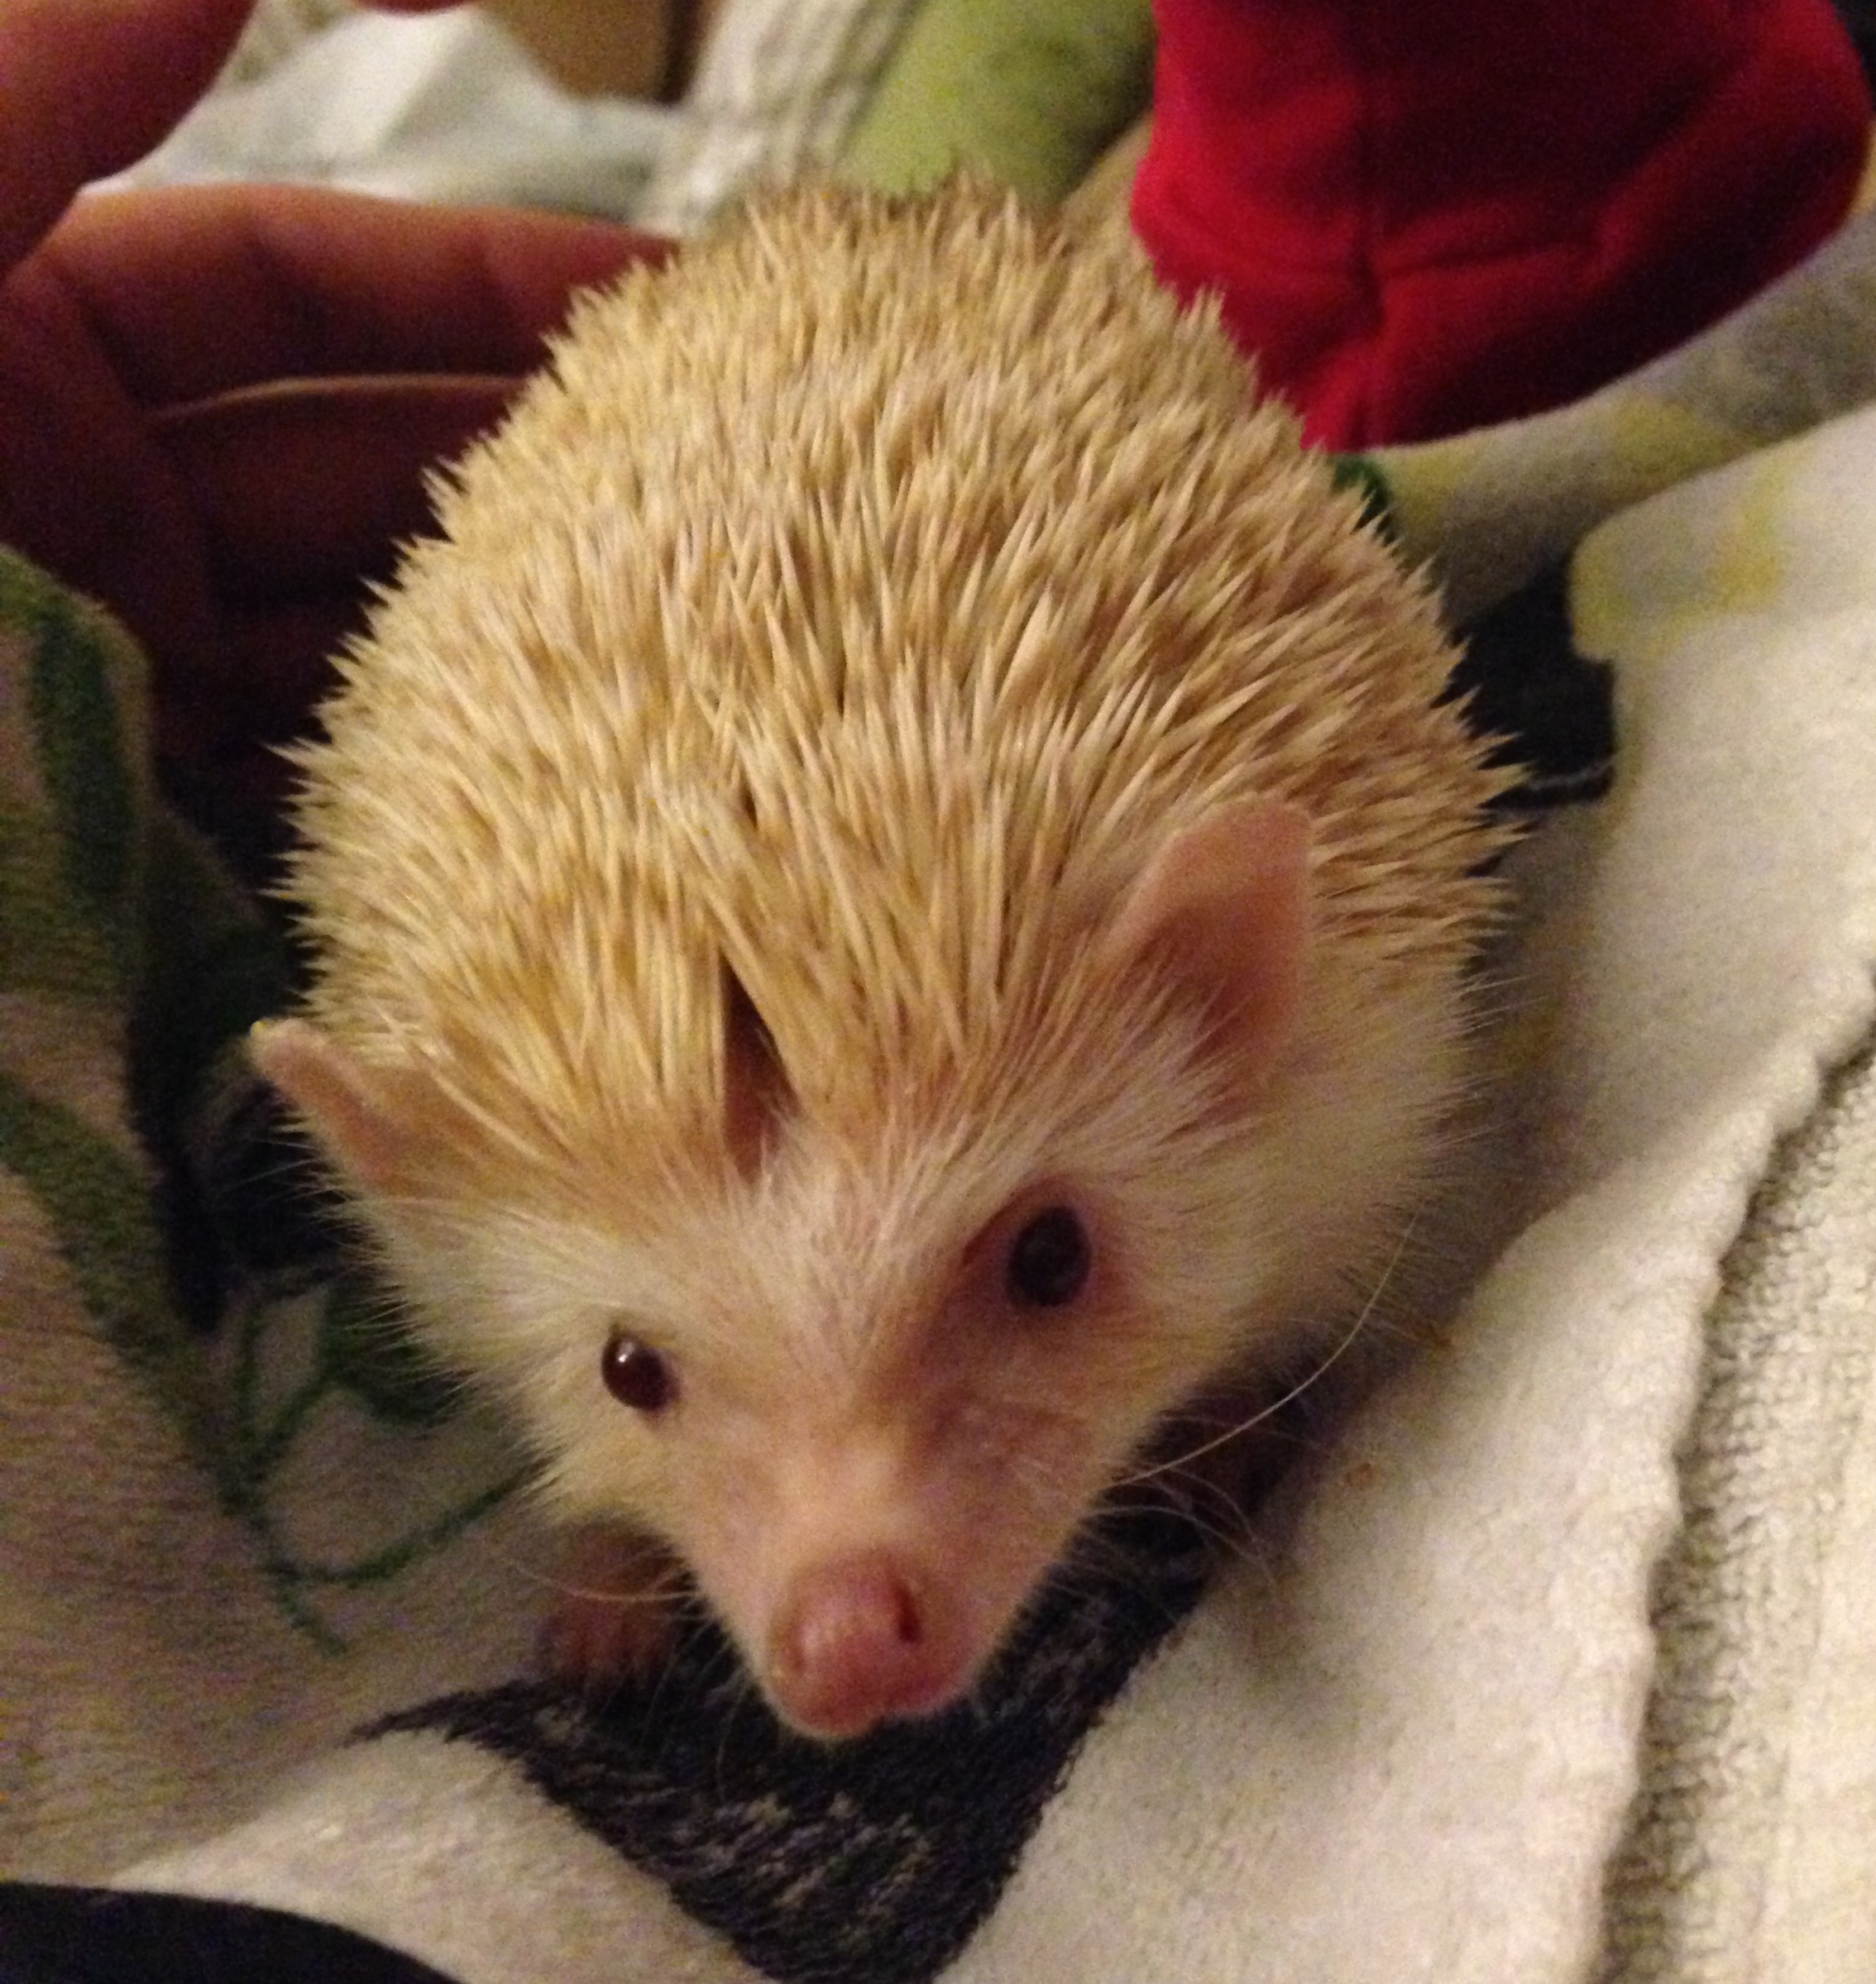 It's hard not to love a hedgehog